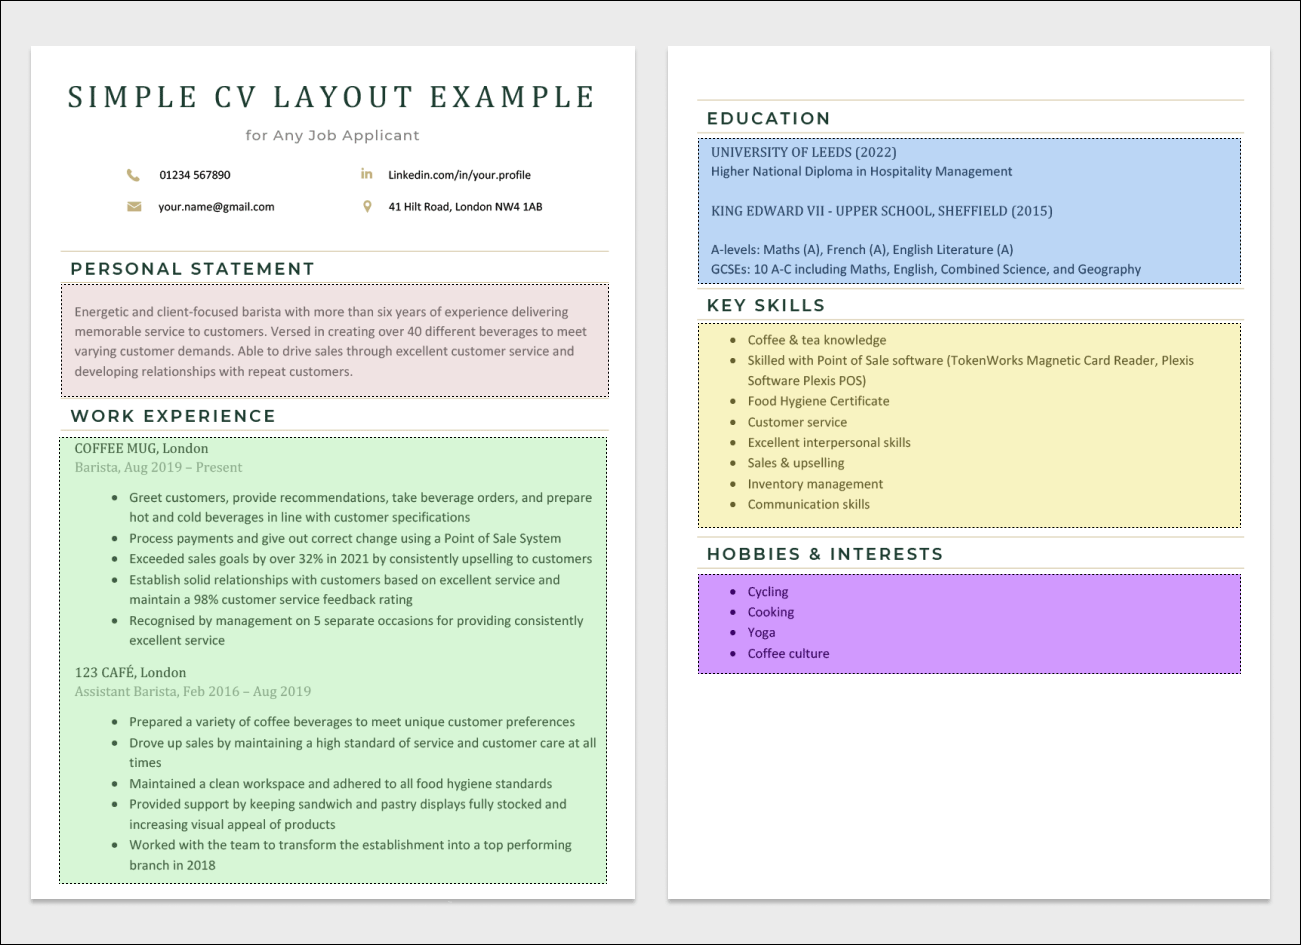 Example of a two-page simple CV layout displayed side-by-side with different CV sections highlighted in coloured boxes on a light grey background to illustrate how a simple CV should look like.